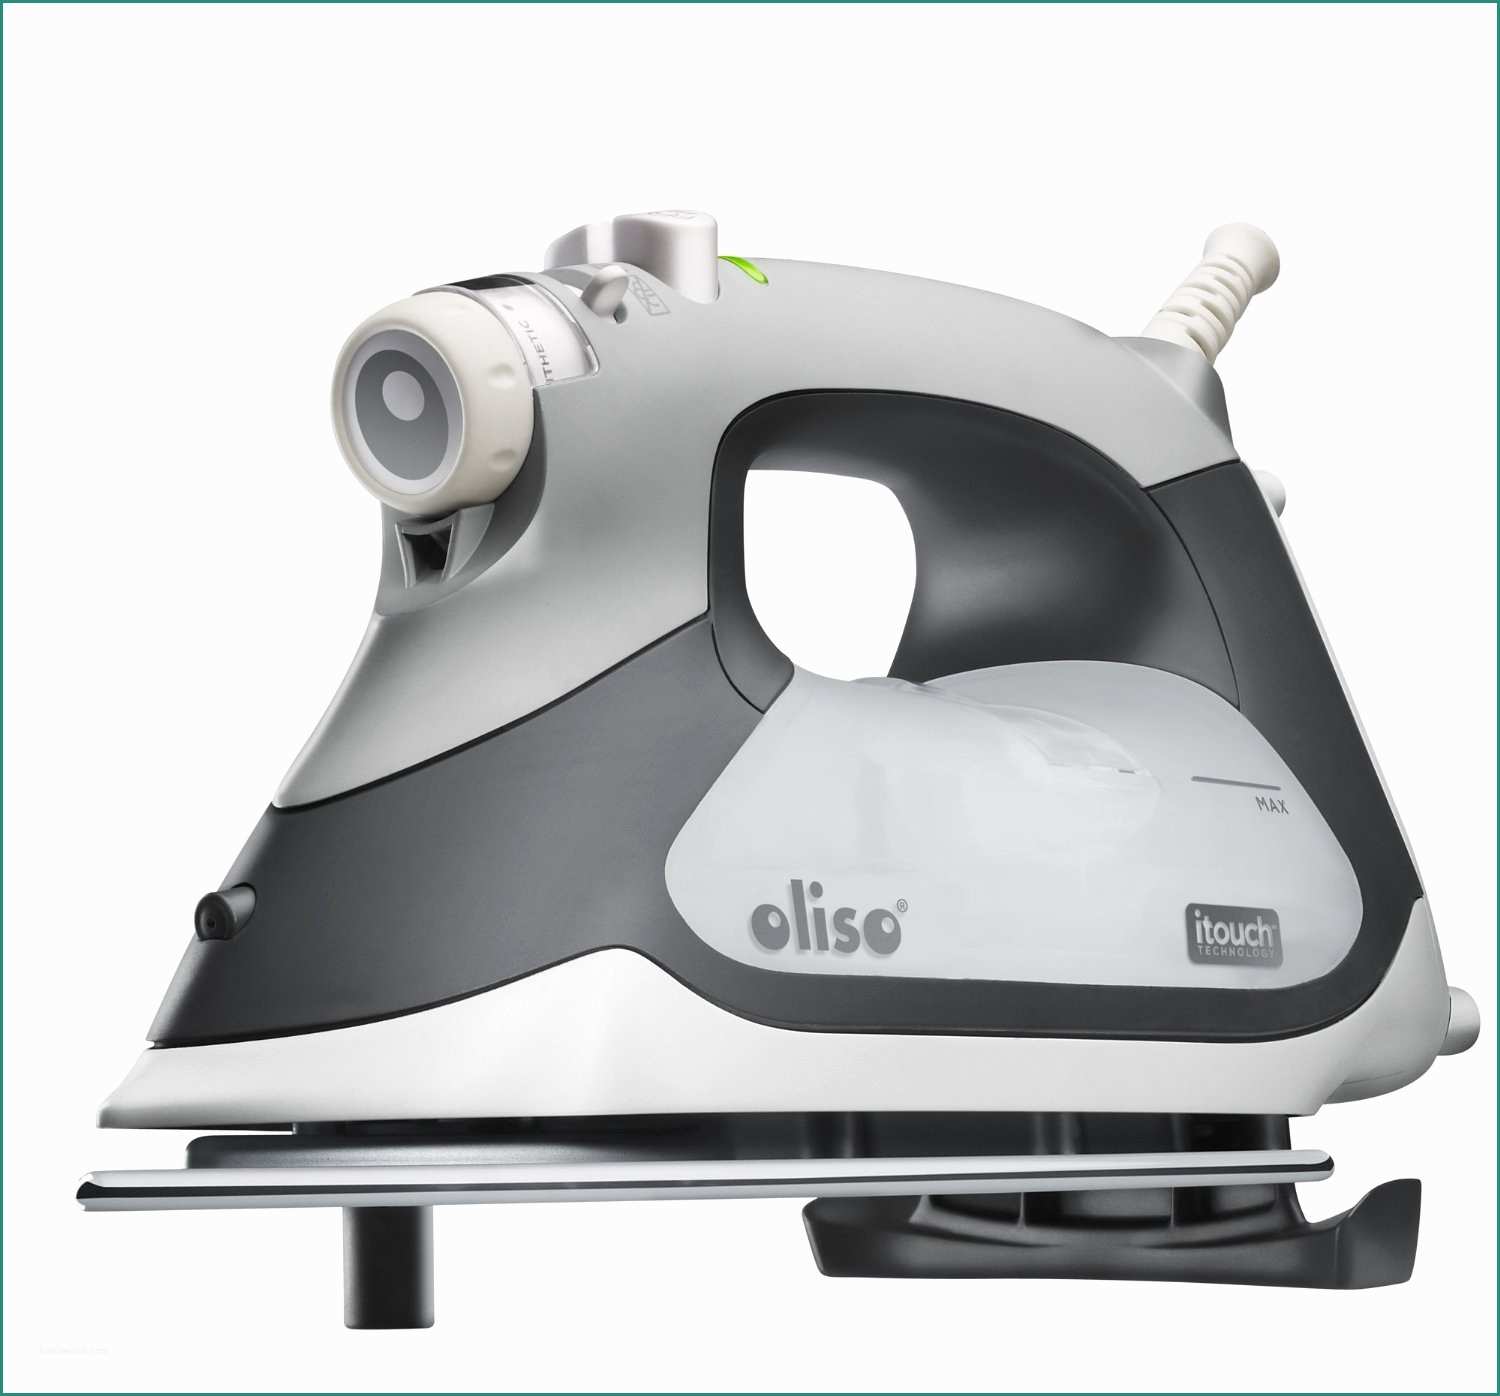 Black and Decker Steam Mop Opinioni E Oliso Tg1100 Review is This Smart Iron Worth It